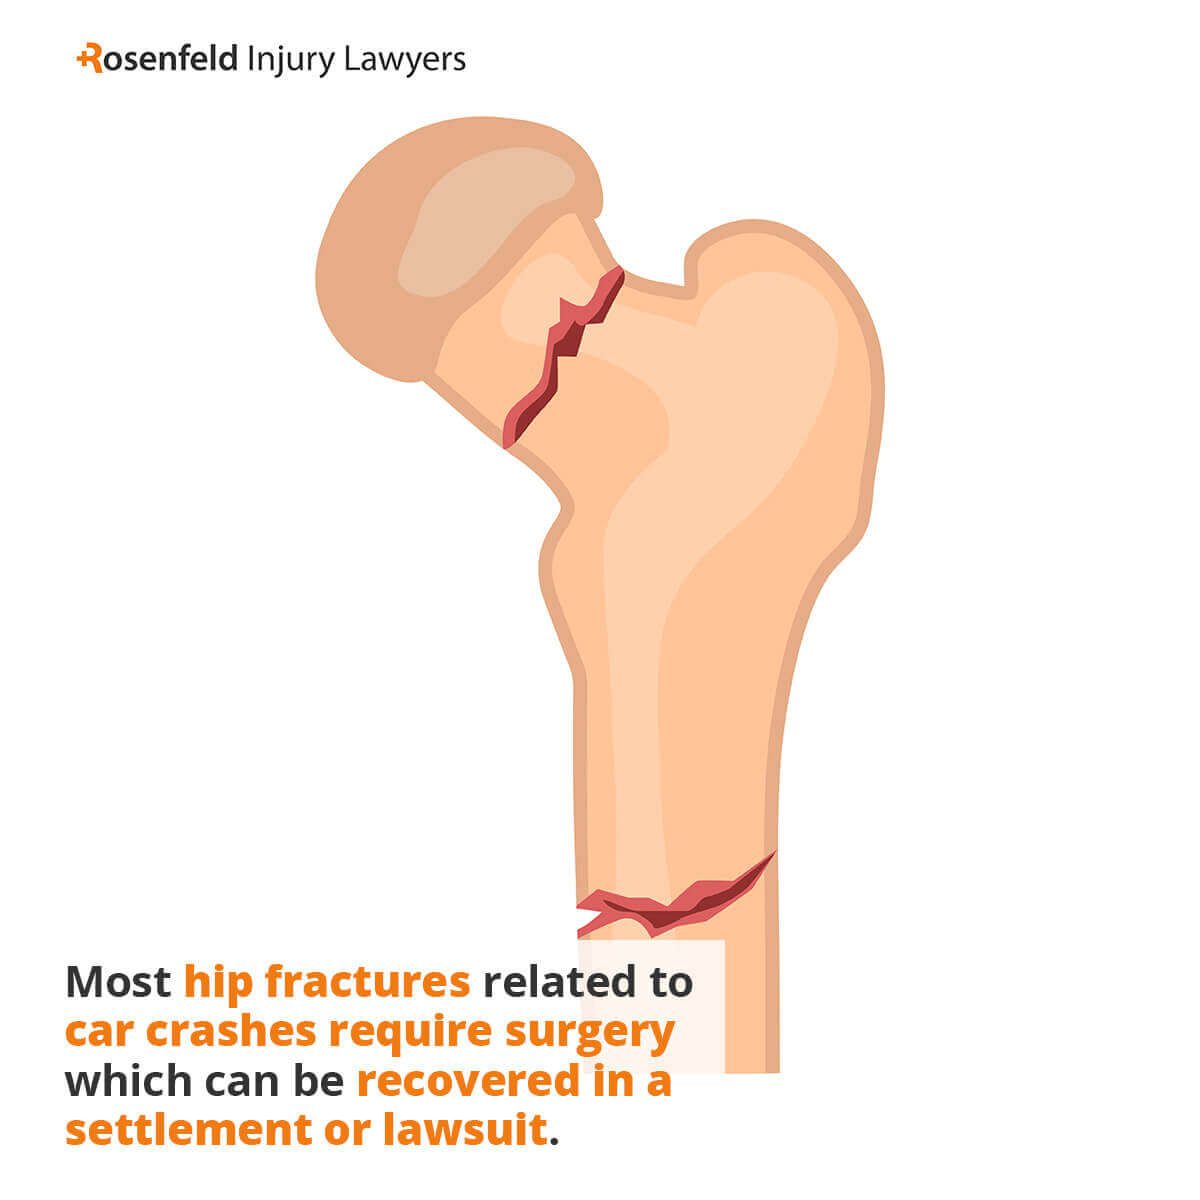 Most hip fractures related to car crashes require surgery which can be recovered in a settlement or lawsuit.